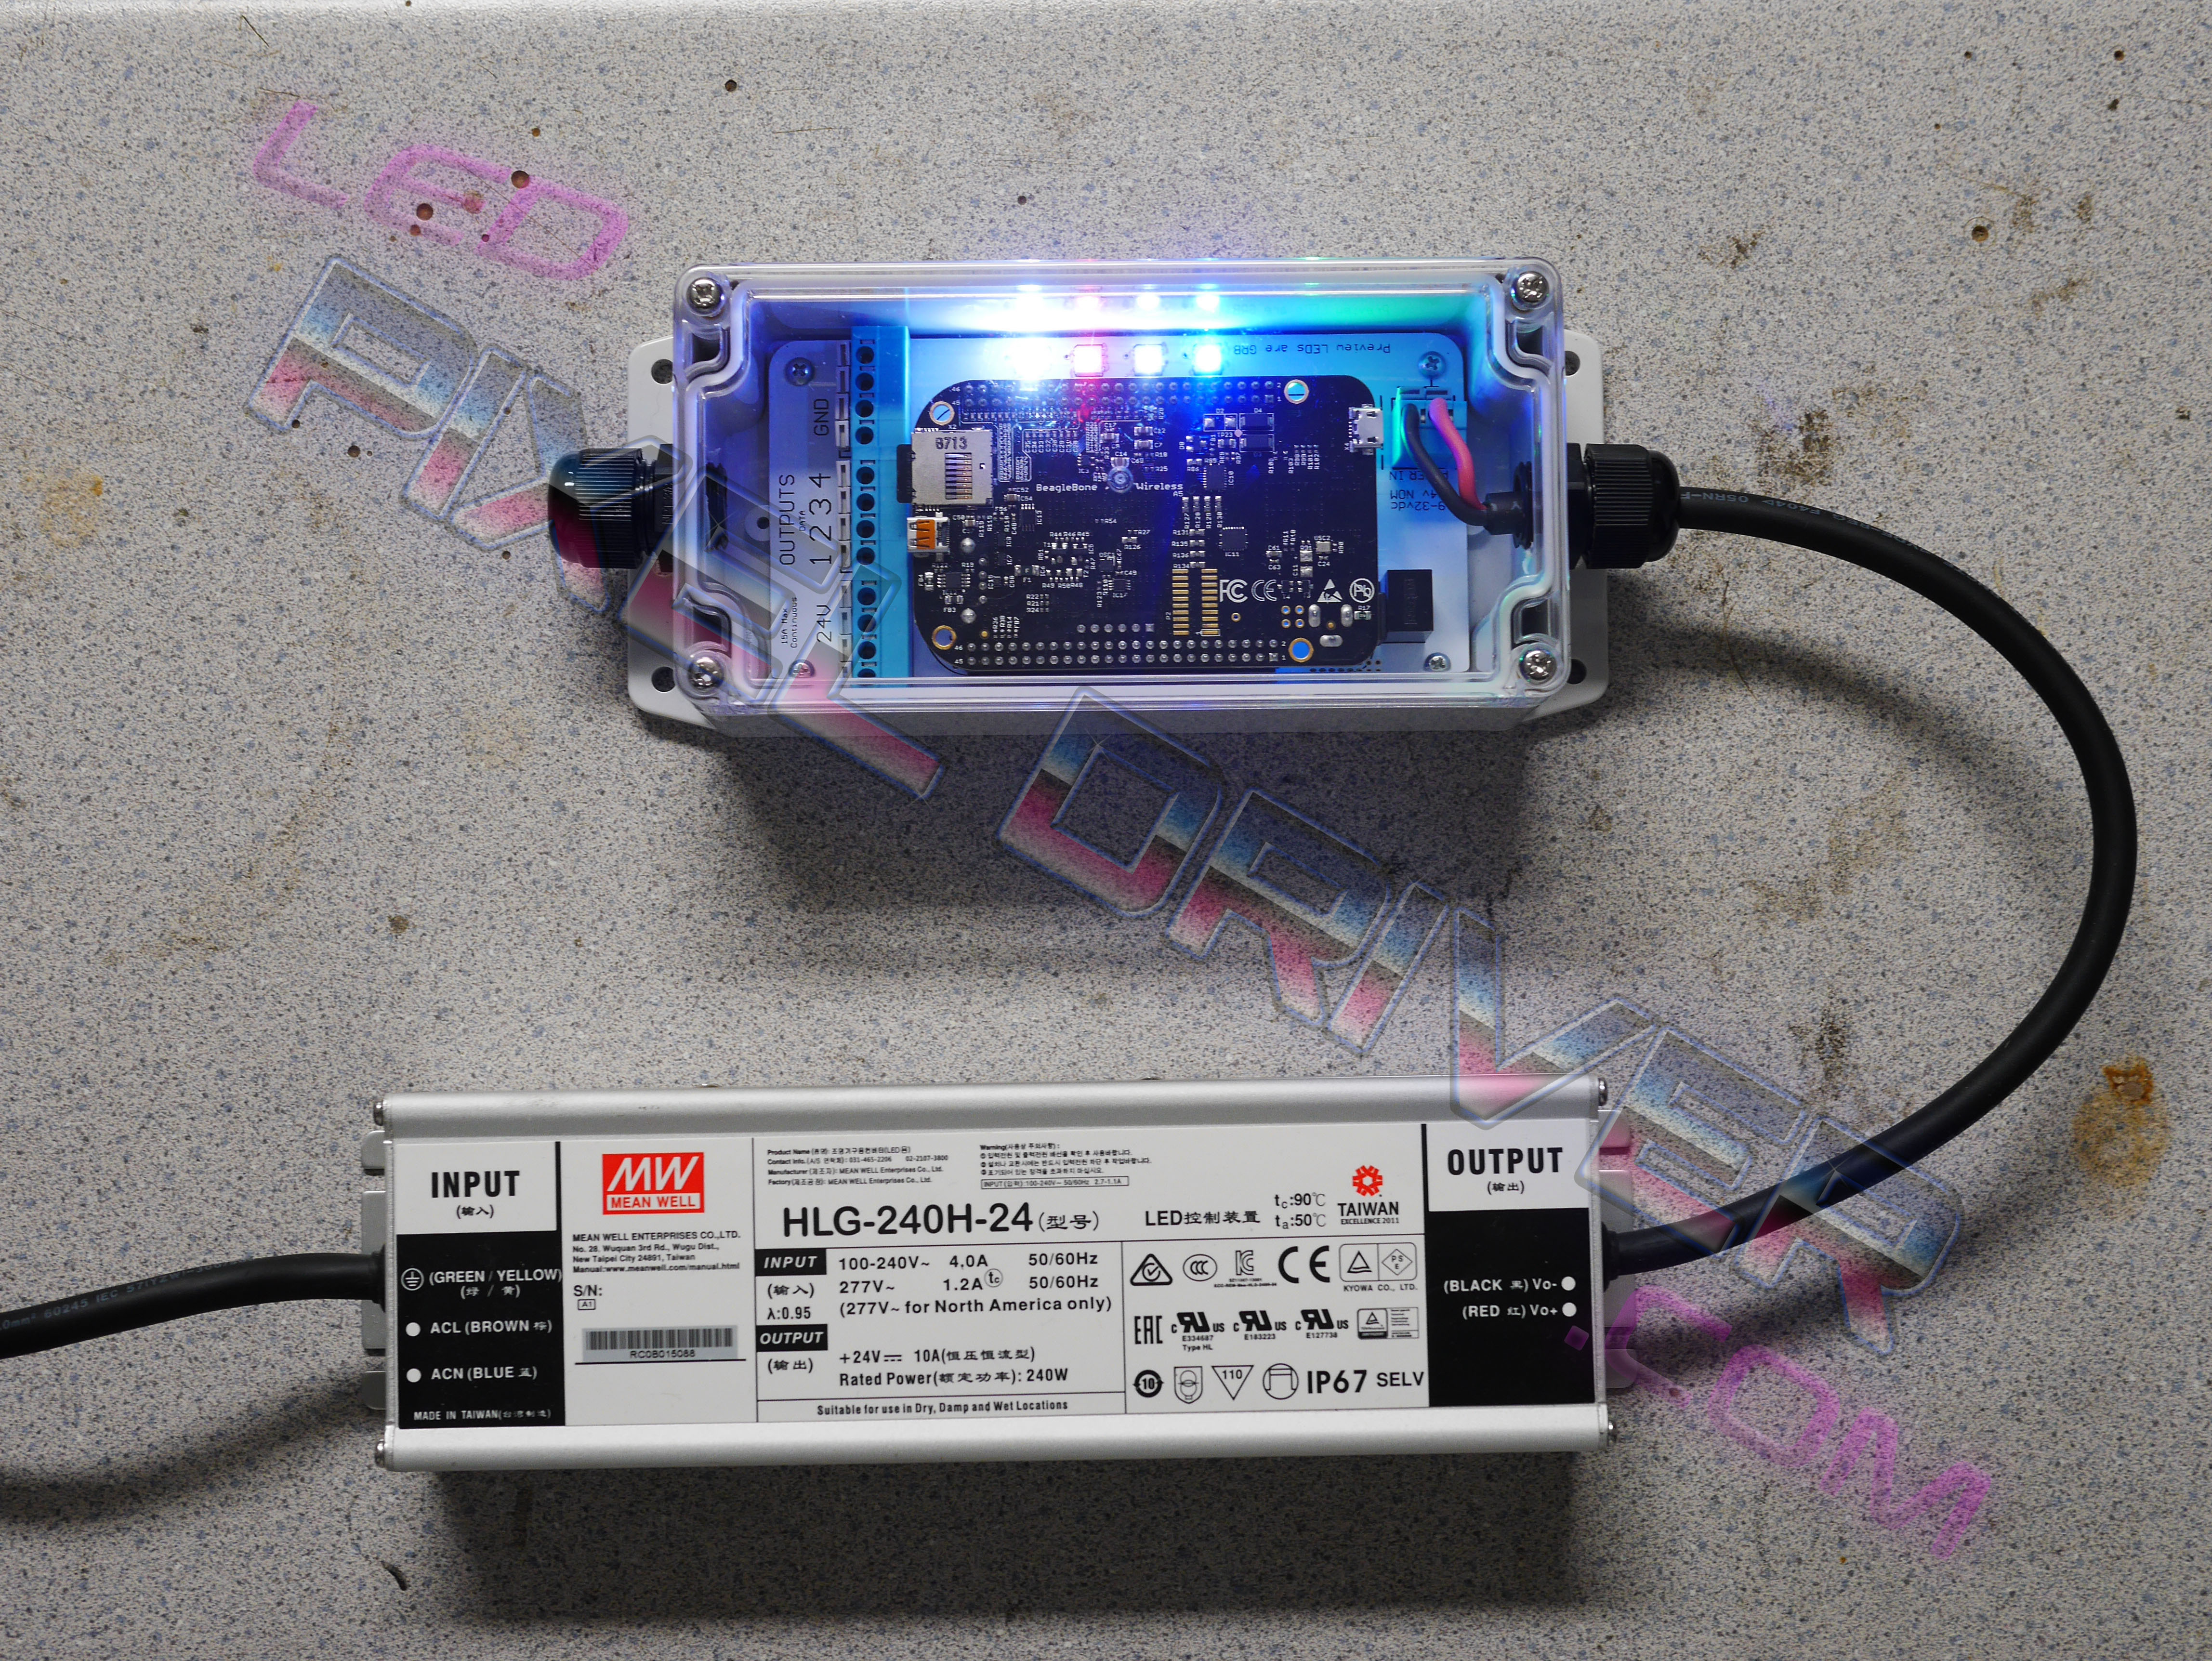 Optional 240W IP67 Rated Power Supply